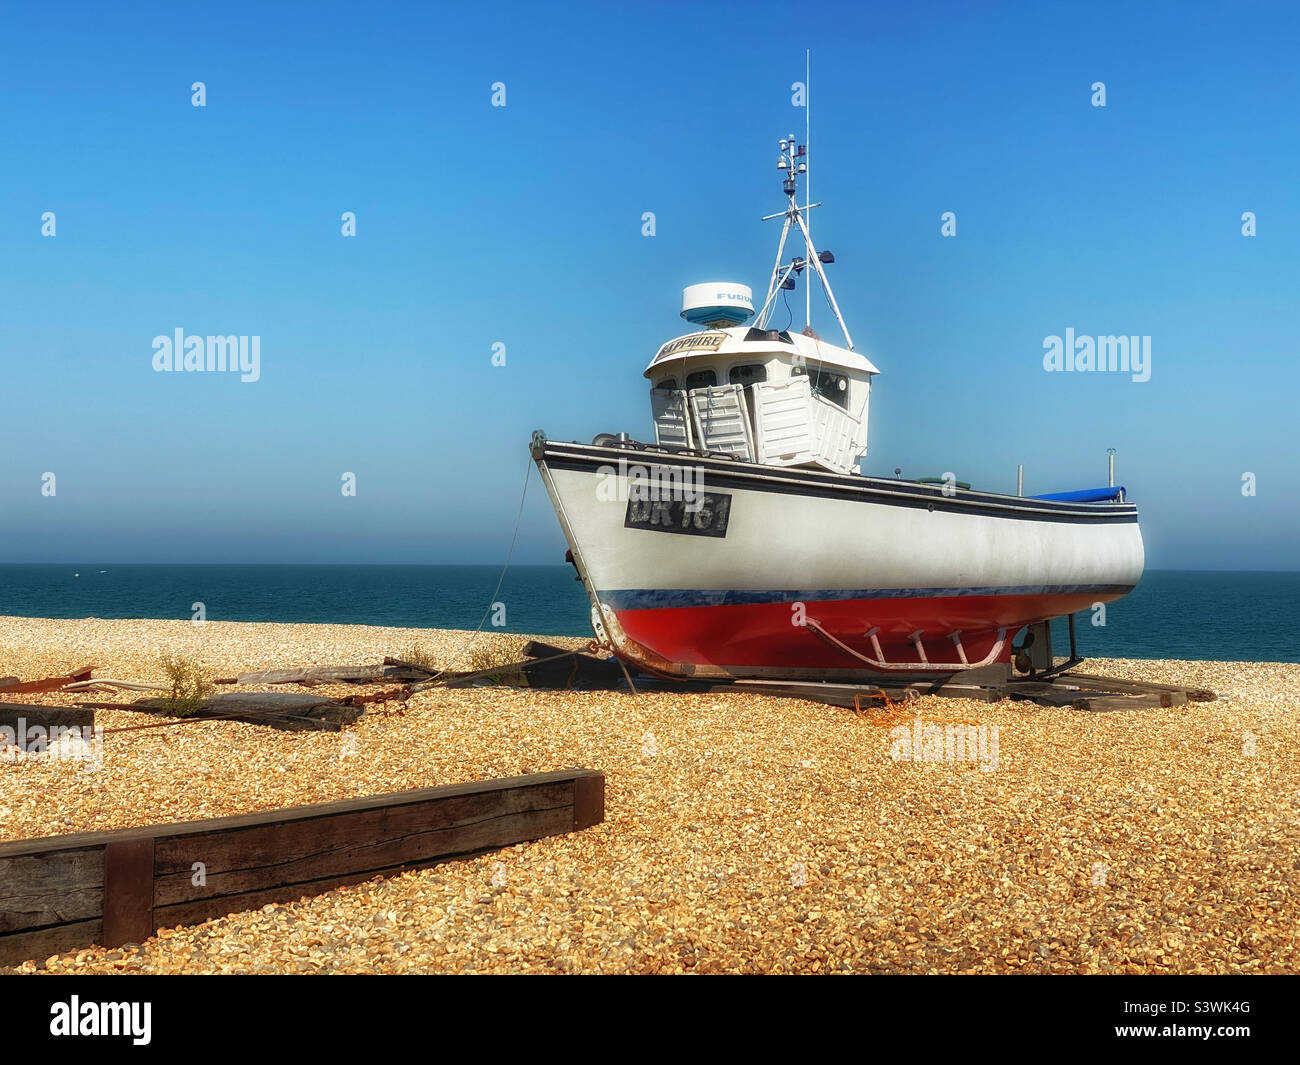 A lone fishing trawler boat has been brought ashore and now lies dormant on a pebble beach. Photo ©️ COLIN HOSKINS. Stock Photo